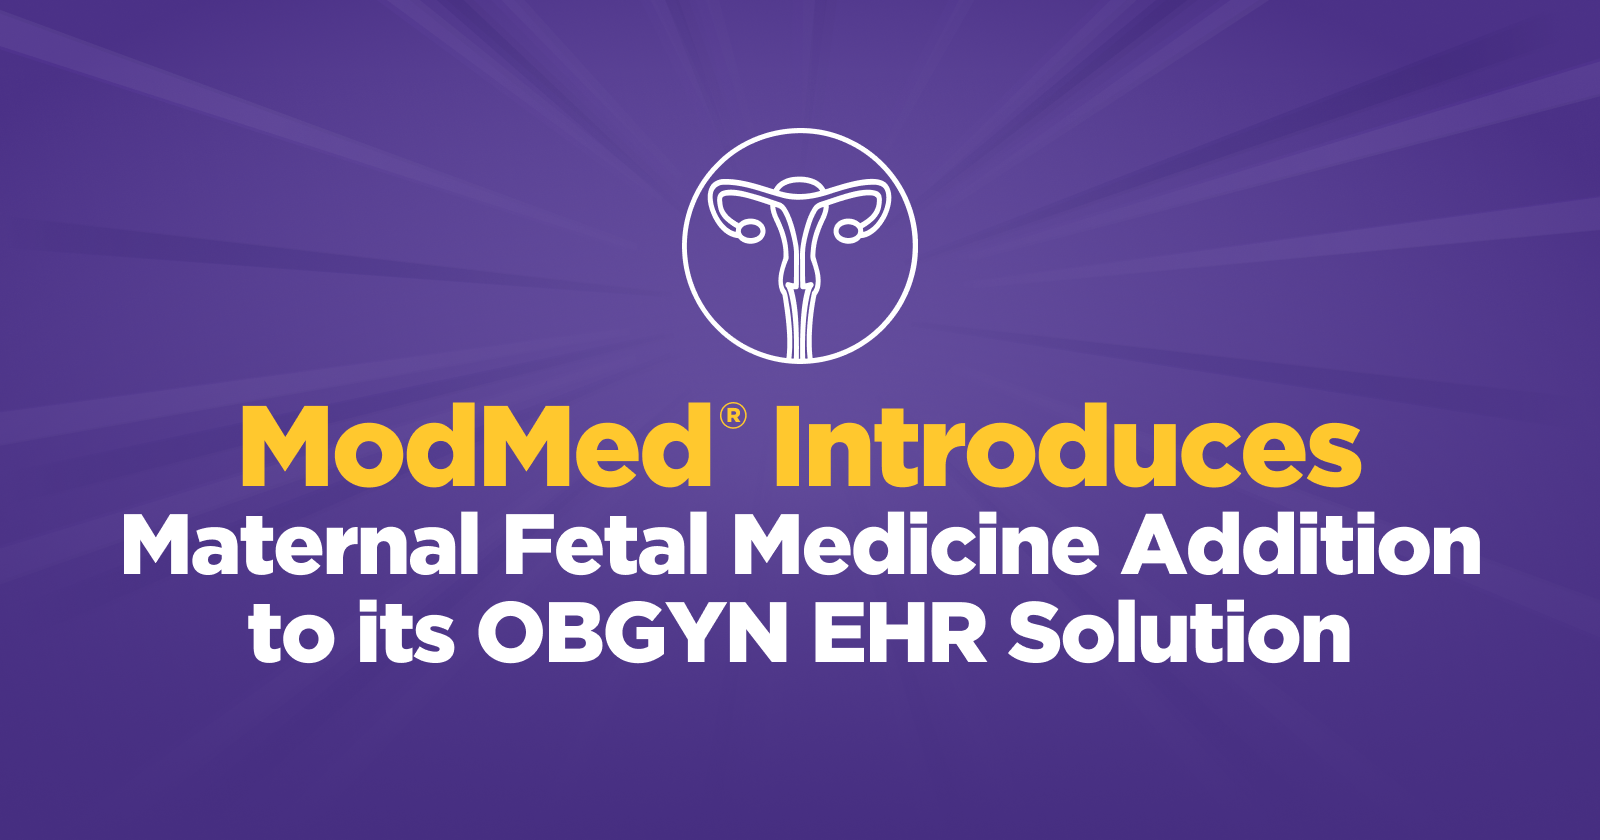 ModMed Introduces MFM Addition to its OBGYN EHR Solution